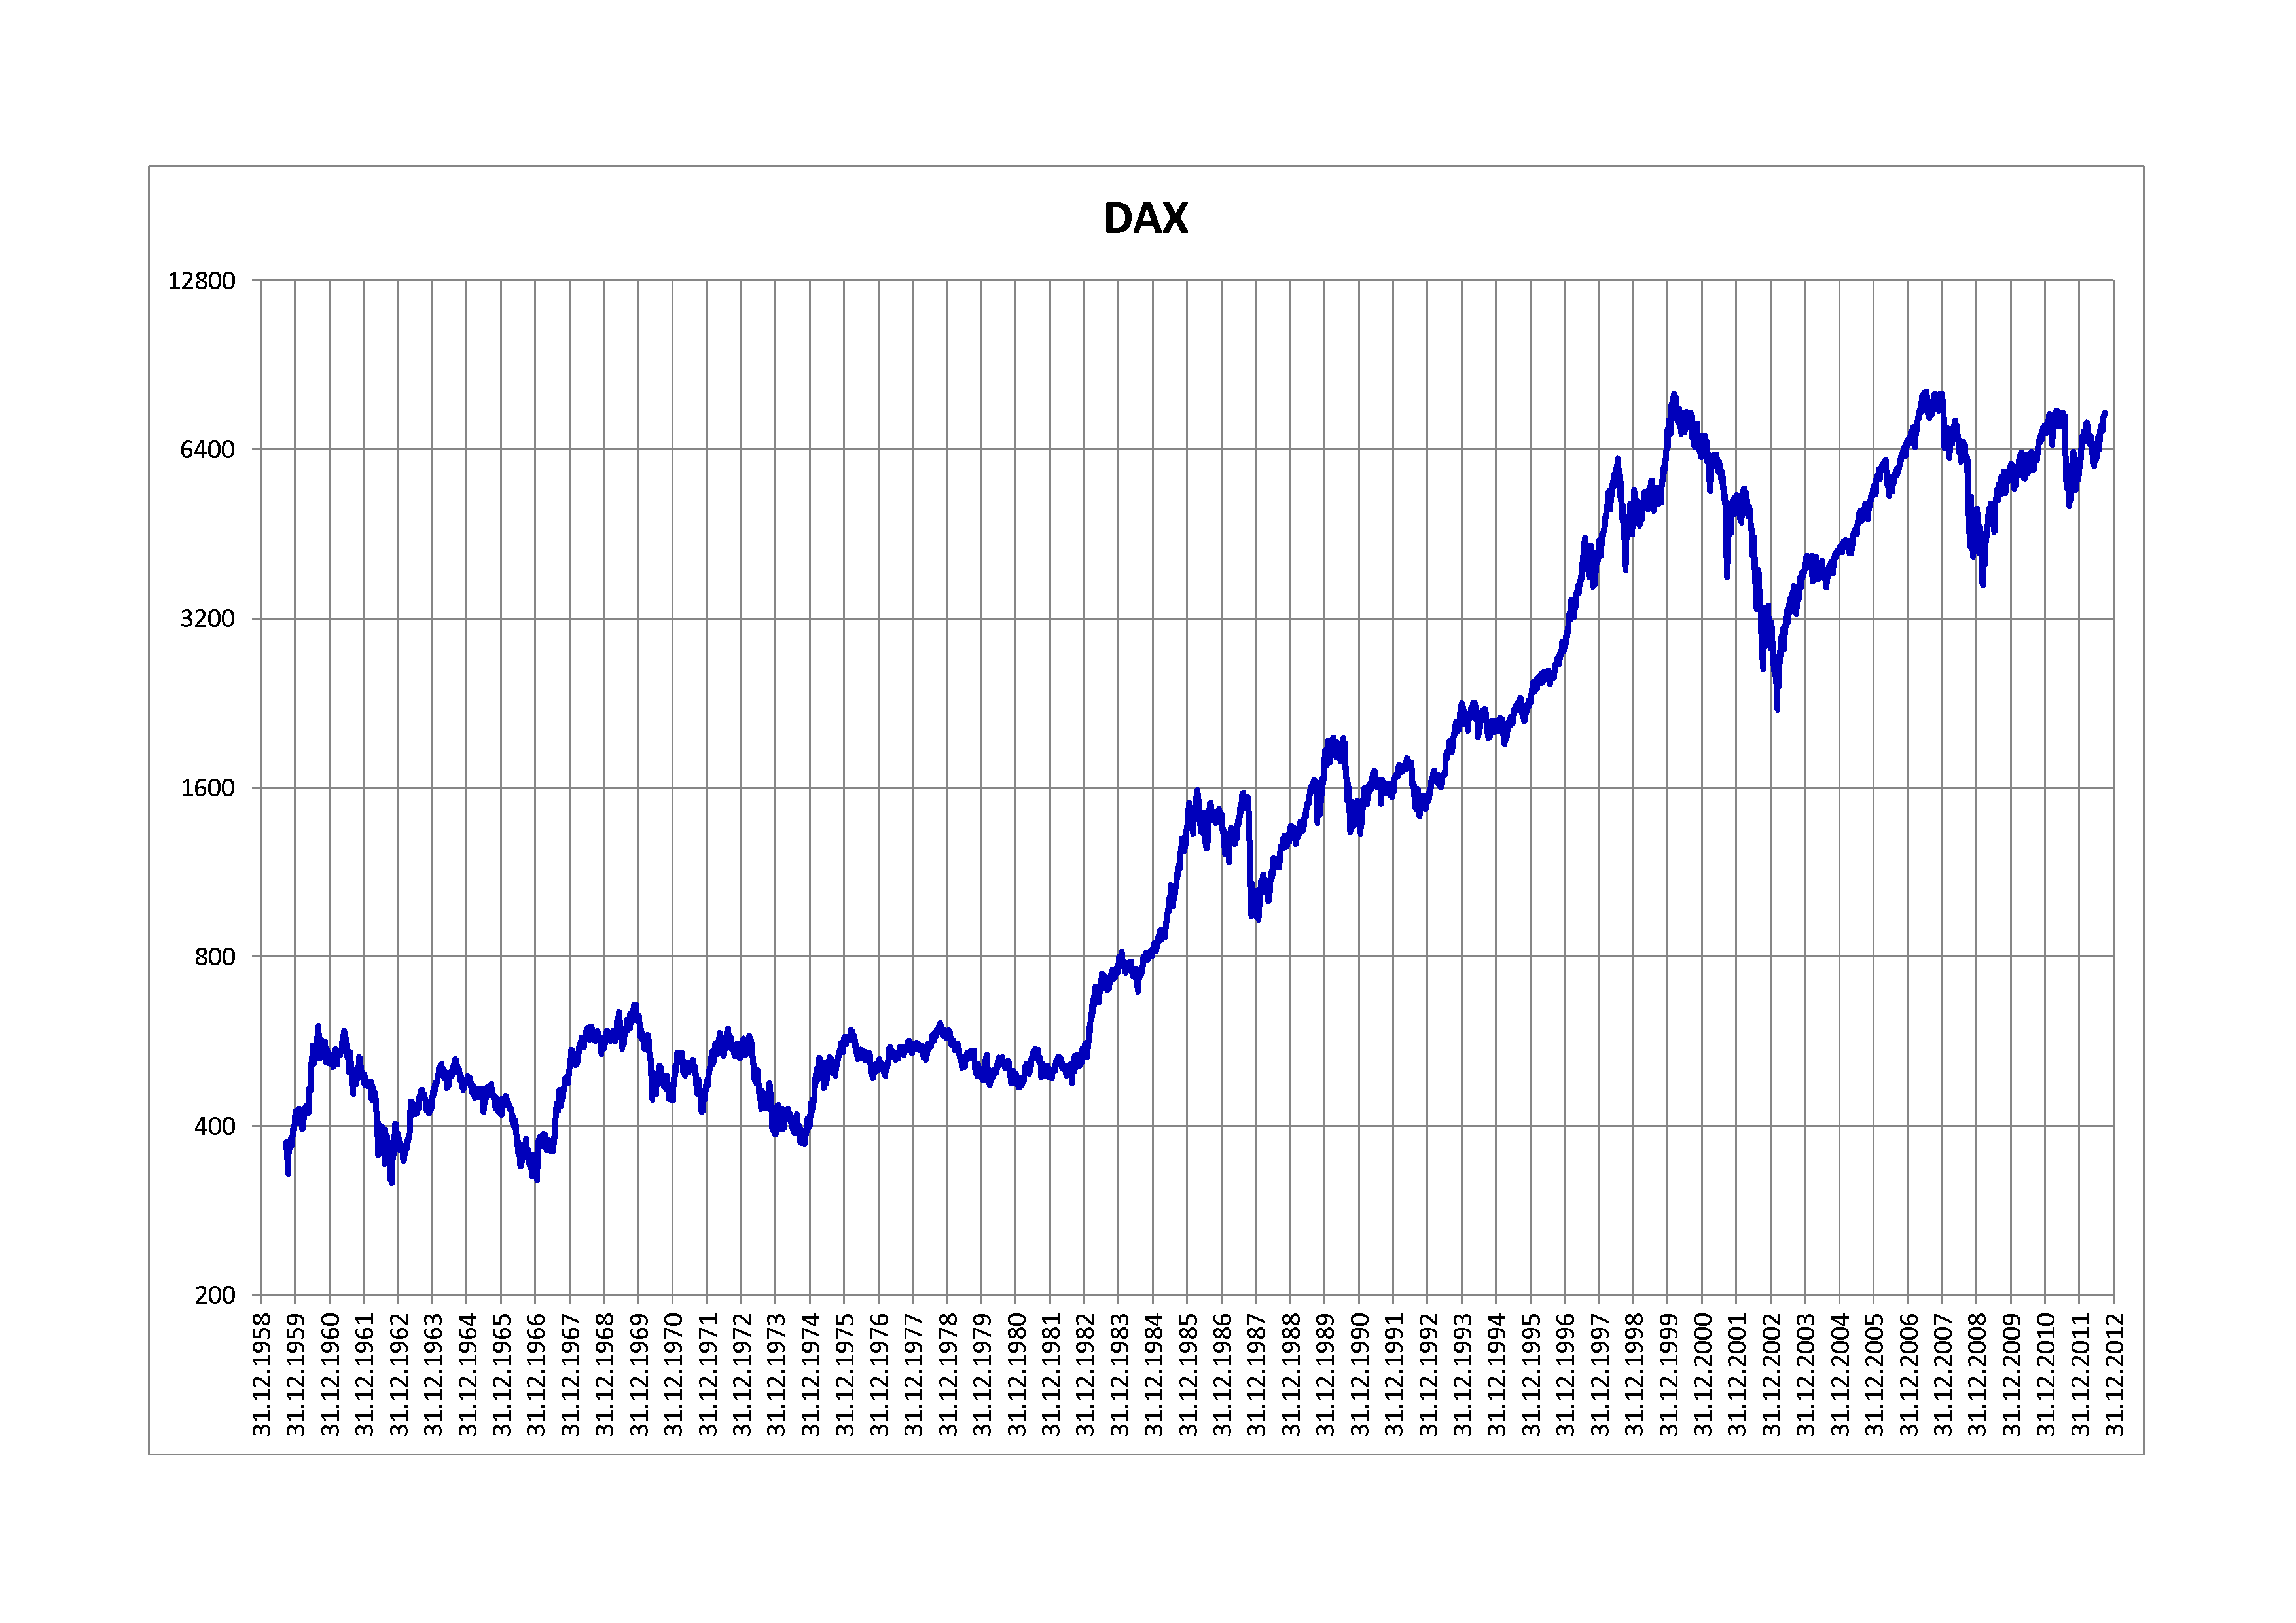 DAX Index Returns By Year From 1955 To 2012 | Seeking Alpha3508 x 2480